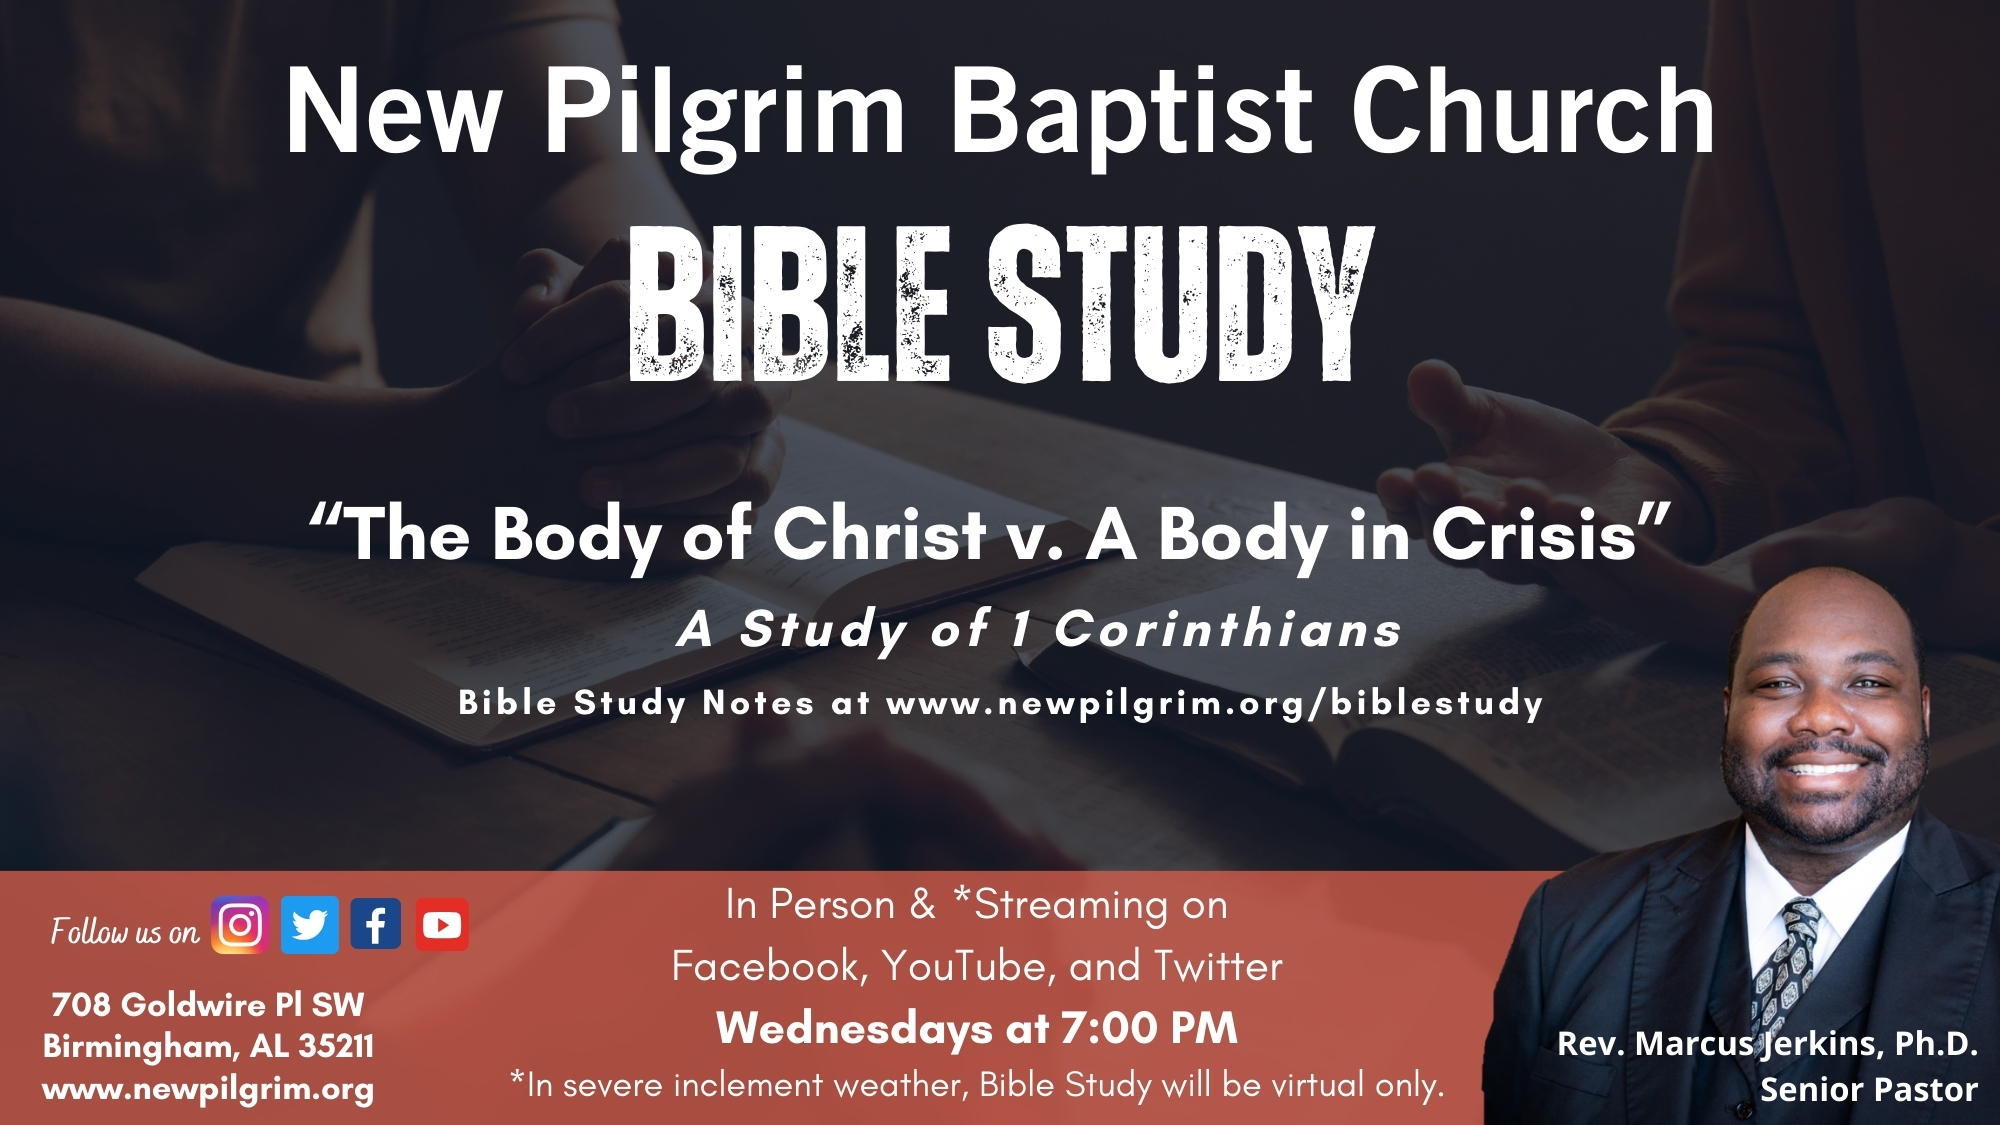 Bible Study is Wednesday Nights at 7 pm